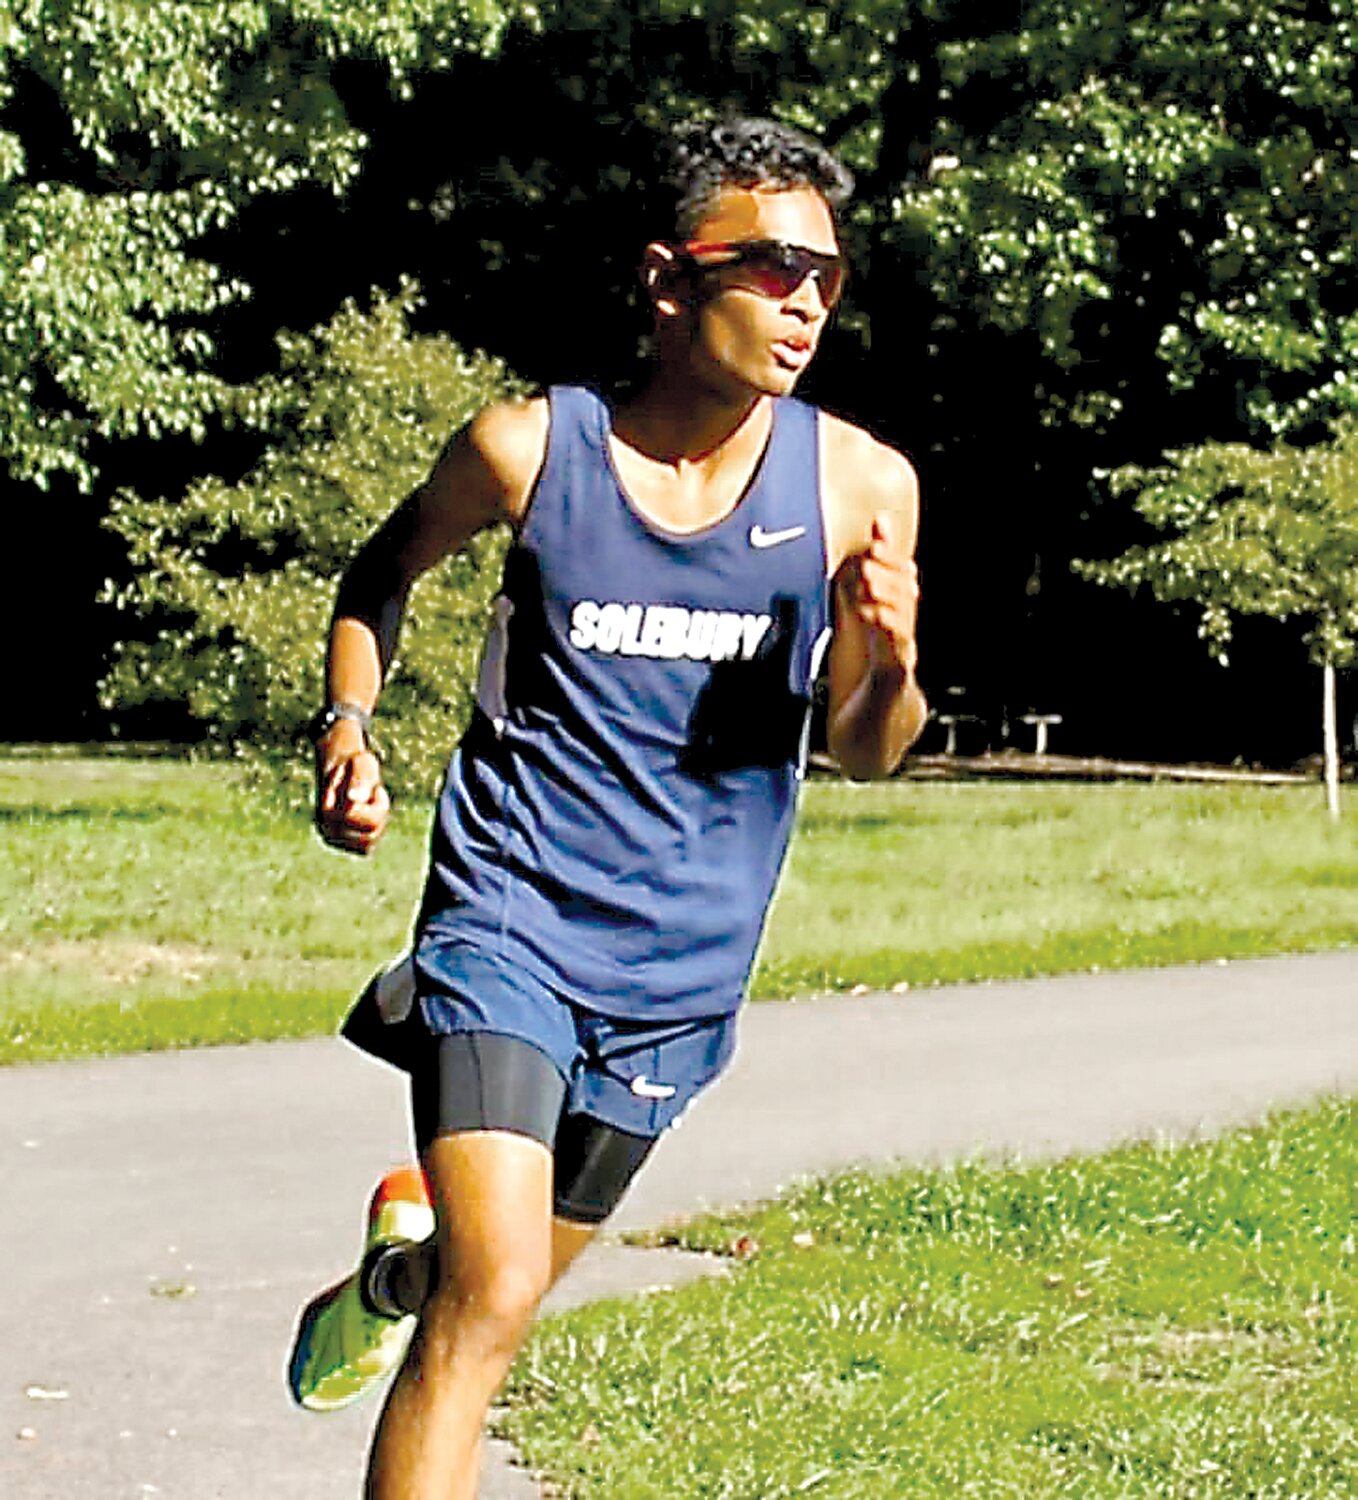 Solebury senior Aum Desai, a Columbia-signee, hopes to add to his four gold medals at the May 20 PAISAA state championships.